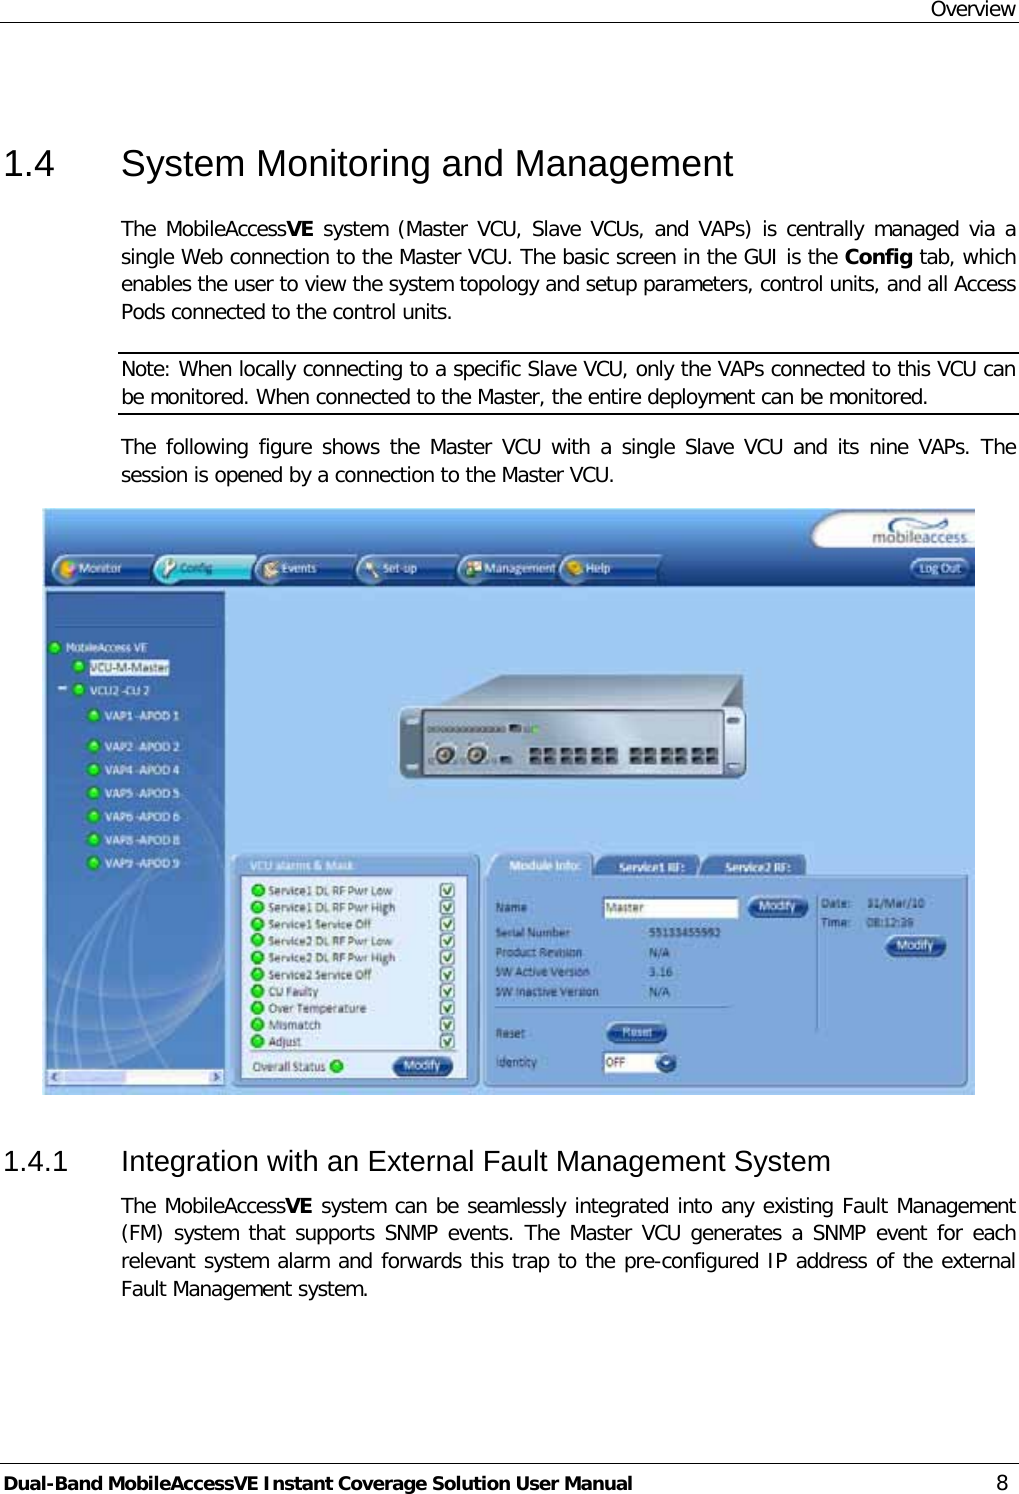 Overview Dual-Band MobileAccessVE Instant Coverage Solution User Manual 8  1.4  System Monitoring and Management The MobileAccessVE system (Master VCU, Slave VCUs, and VAPs) is centrally managed via a single Web connection to the Master VCU. The basic screen in the GUI is the Config tab, which enables the user to view the system topology and setup parameters, control units, and all Access Pods connected to the control units. Note: When locally connecting to a specific Slave VCU, only the VAPs connected to this VCU can be monitored. When connected to the Master, the entire deployment can be monitored.  The following figure shows the Master VCU with a single Slave VCU and its nine VAPs. The session is opened by a connection to the Master VCU.  1.4.1  Integration with an External Fault Management System The MobileAccessVE system can be seamlessly integrated into any existing Fault Management (FM) system that supports SNMP events. The Master VCU generates a SNMP event for each relevant system alarm and forwards this trap to the pre-configured IP address of the external Fault Management system. 